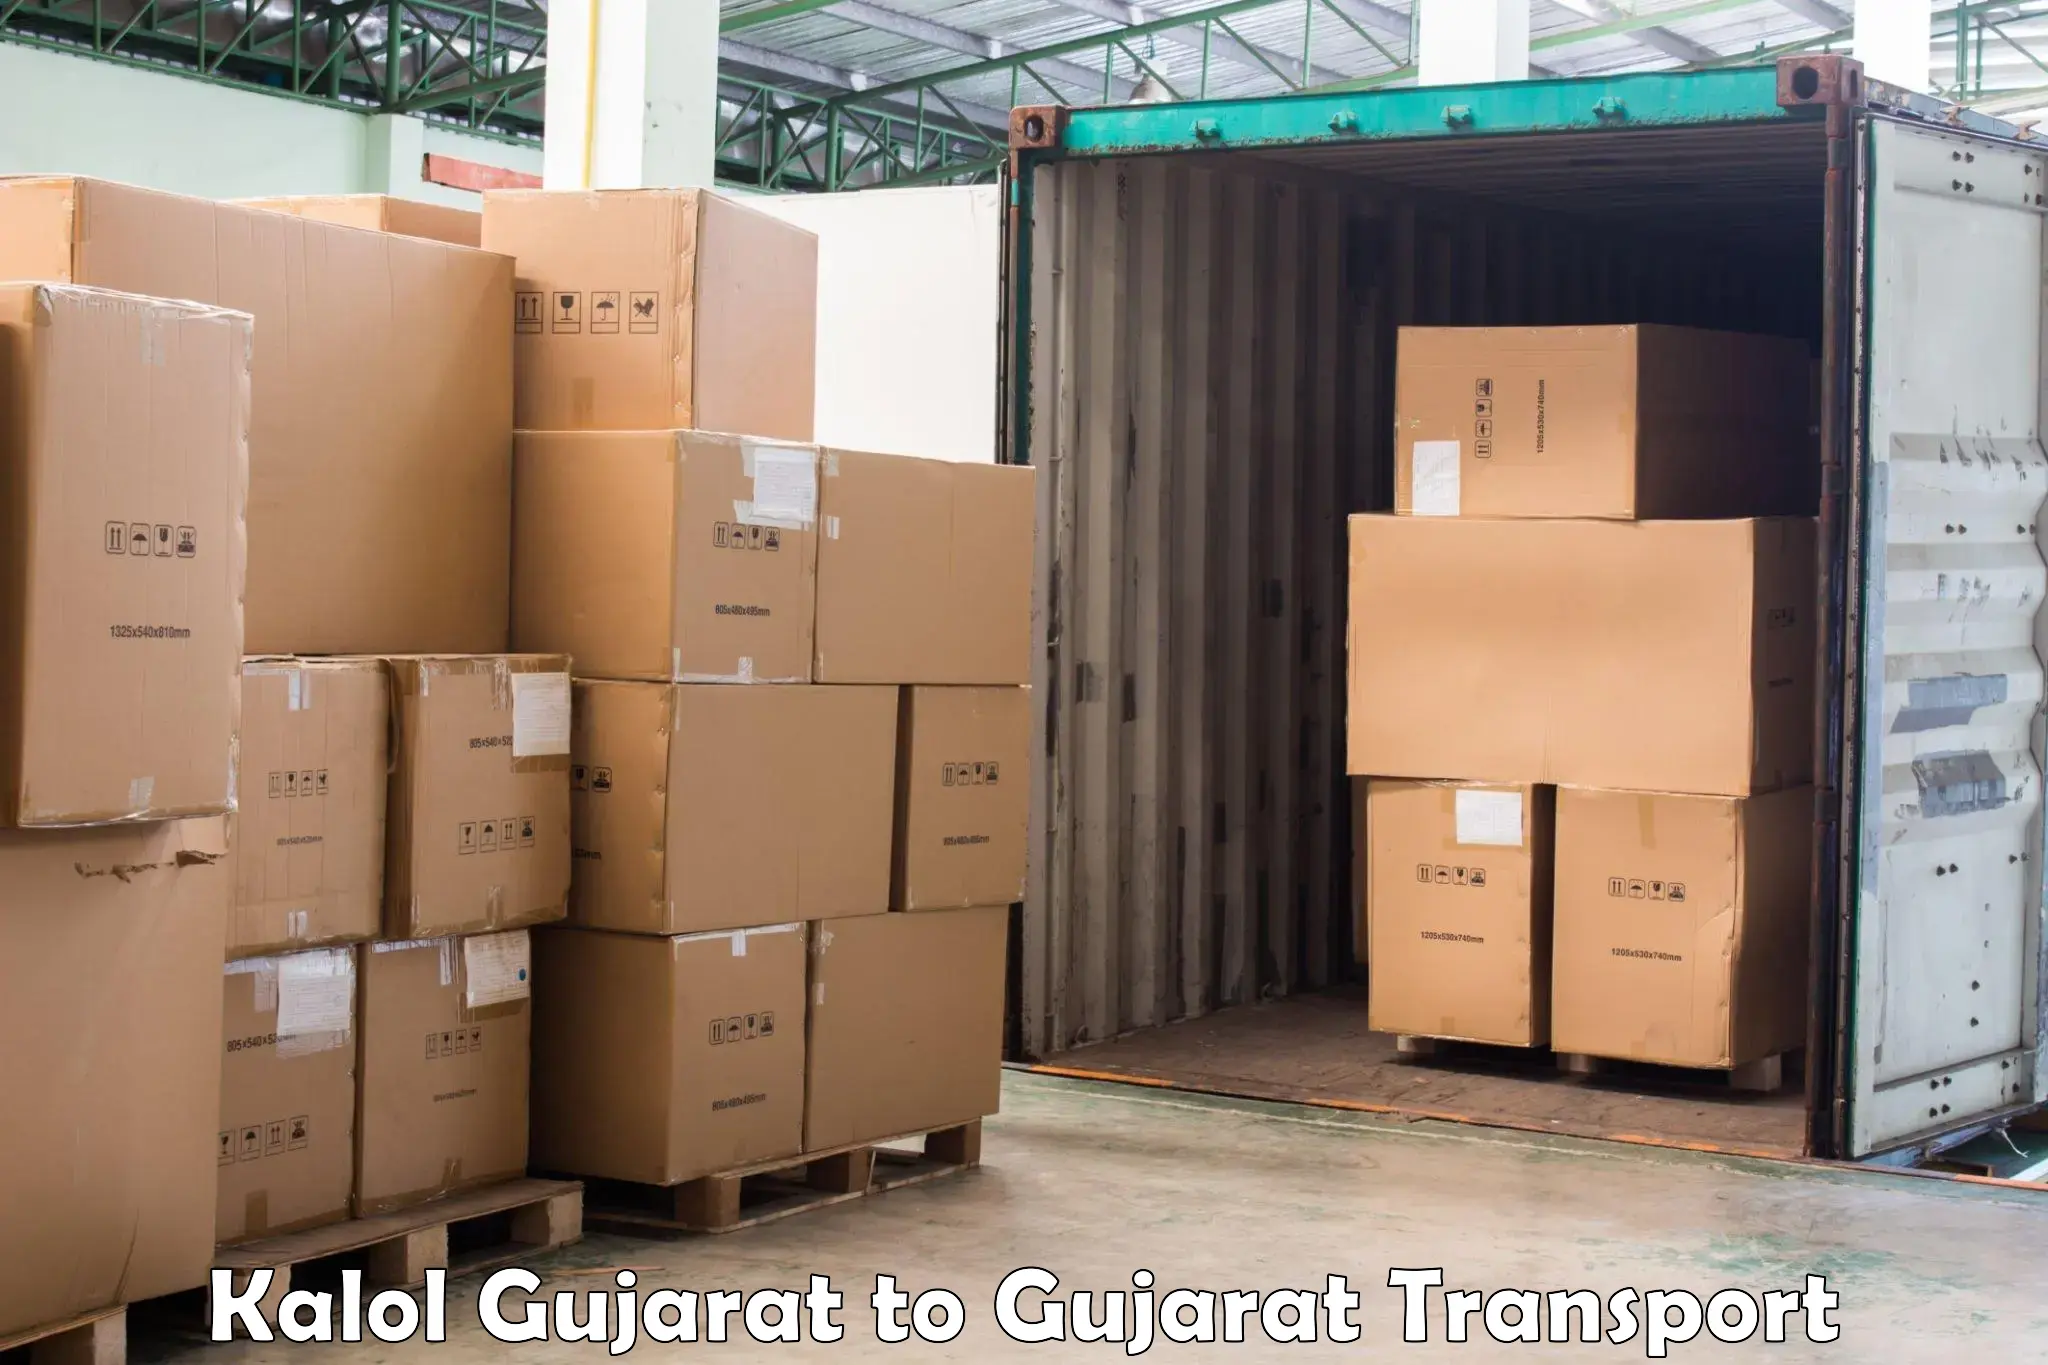 Transport bike from one state to another Kalol Gujarat to Rajkot